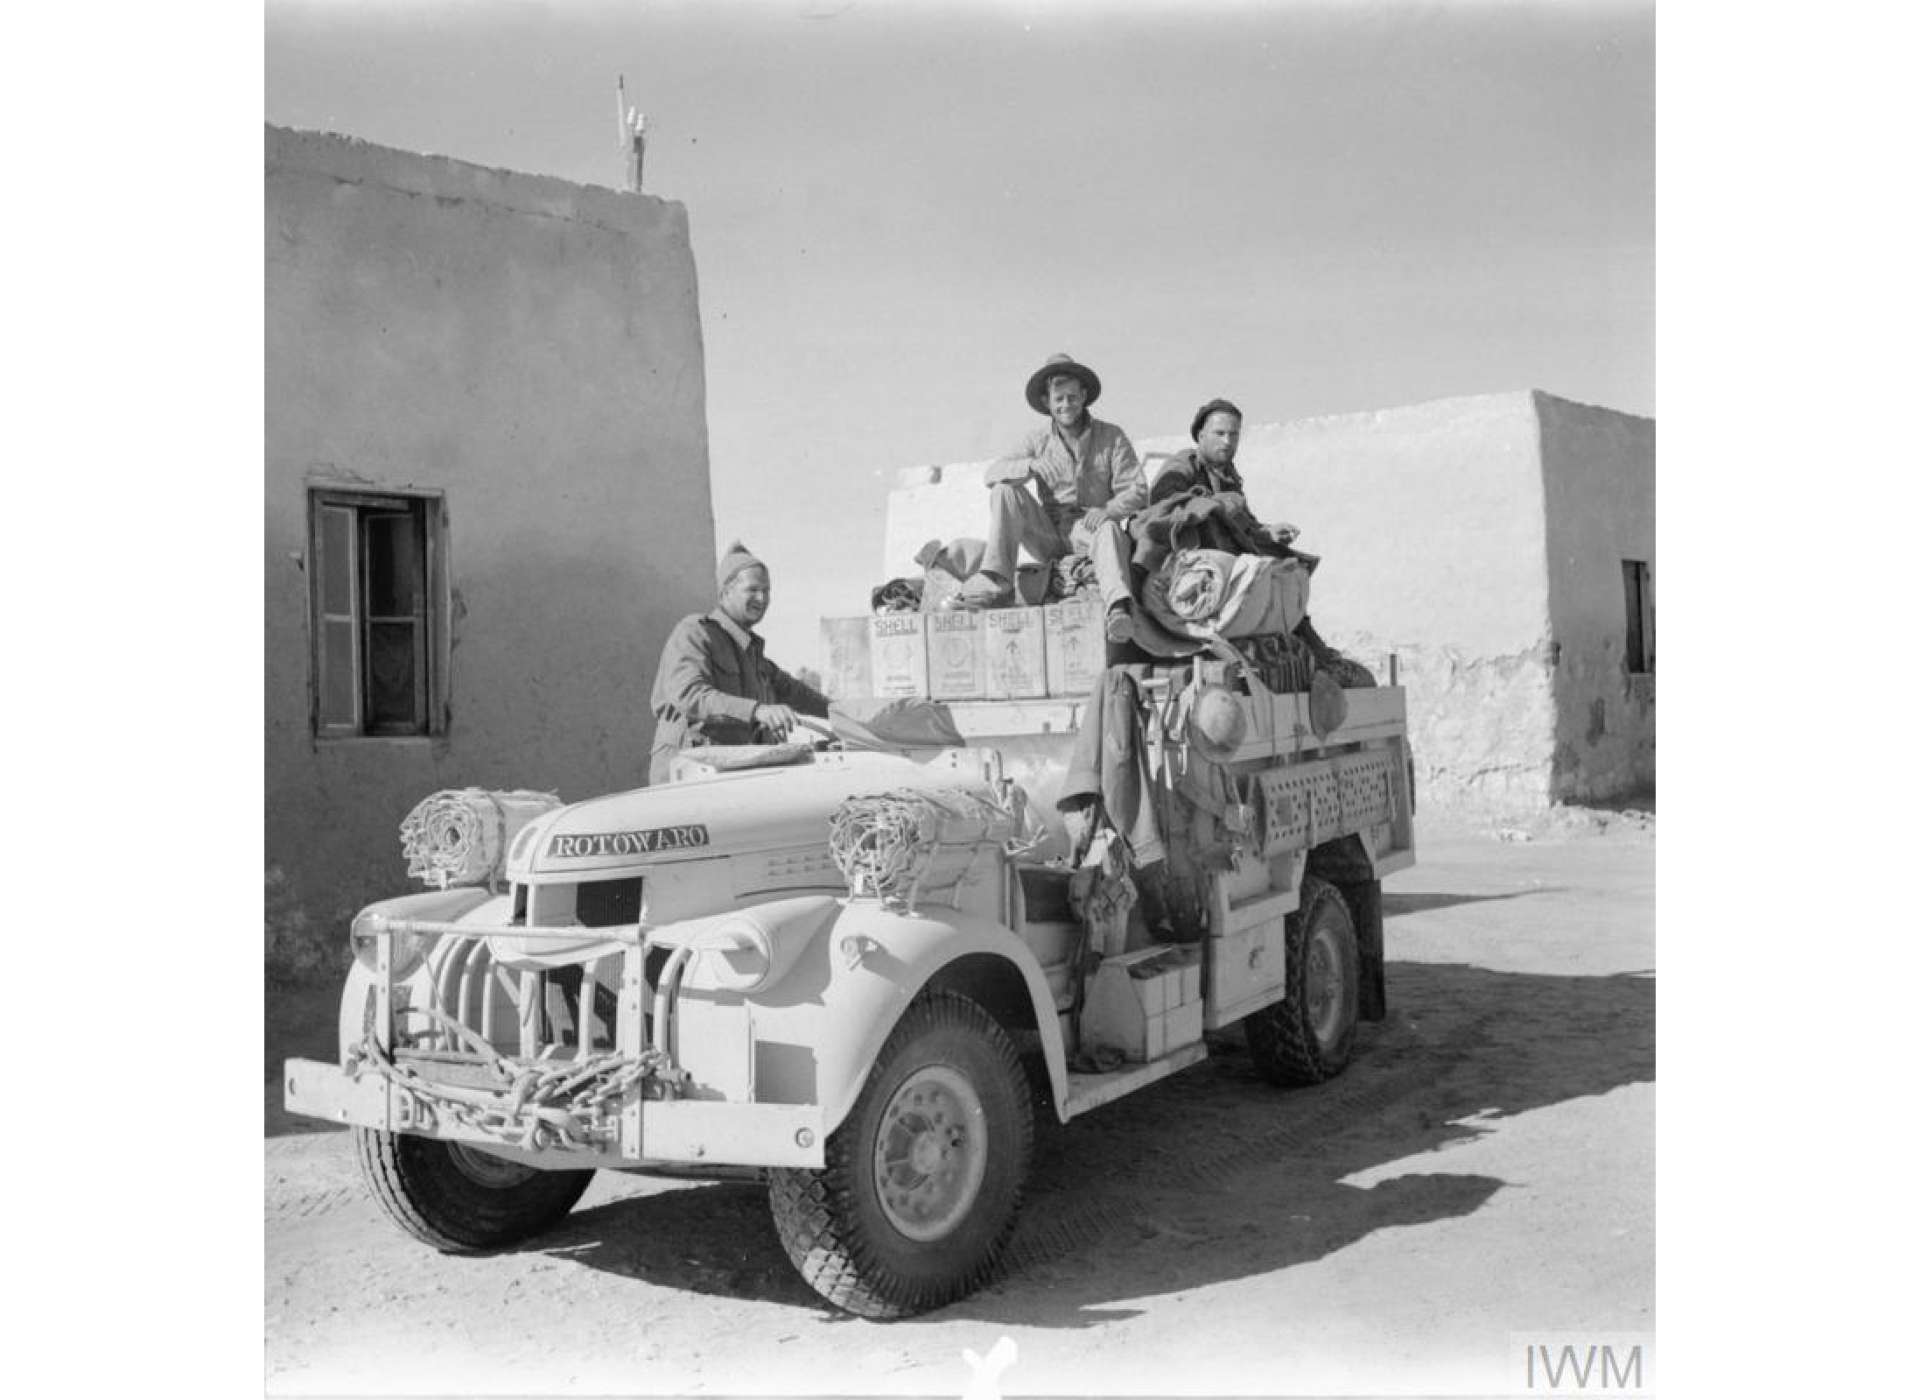 A Chevrolet truck setting off on patrol from Siwa. This was a New Zealand patrol many of whom joined the Long Range Desert Group in 1940 from troops who found themselves at Alexandria without their arms and equipment, which had been lost at sea. Note the word Rotowaro on the bonnet of the truck.  Rotowaro was a small mining village in the northern island of New Zealand.